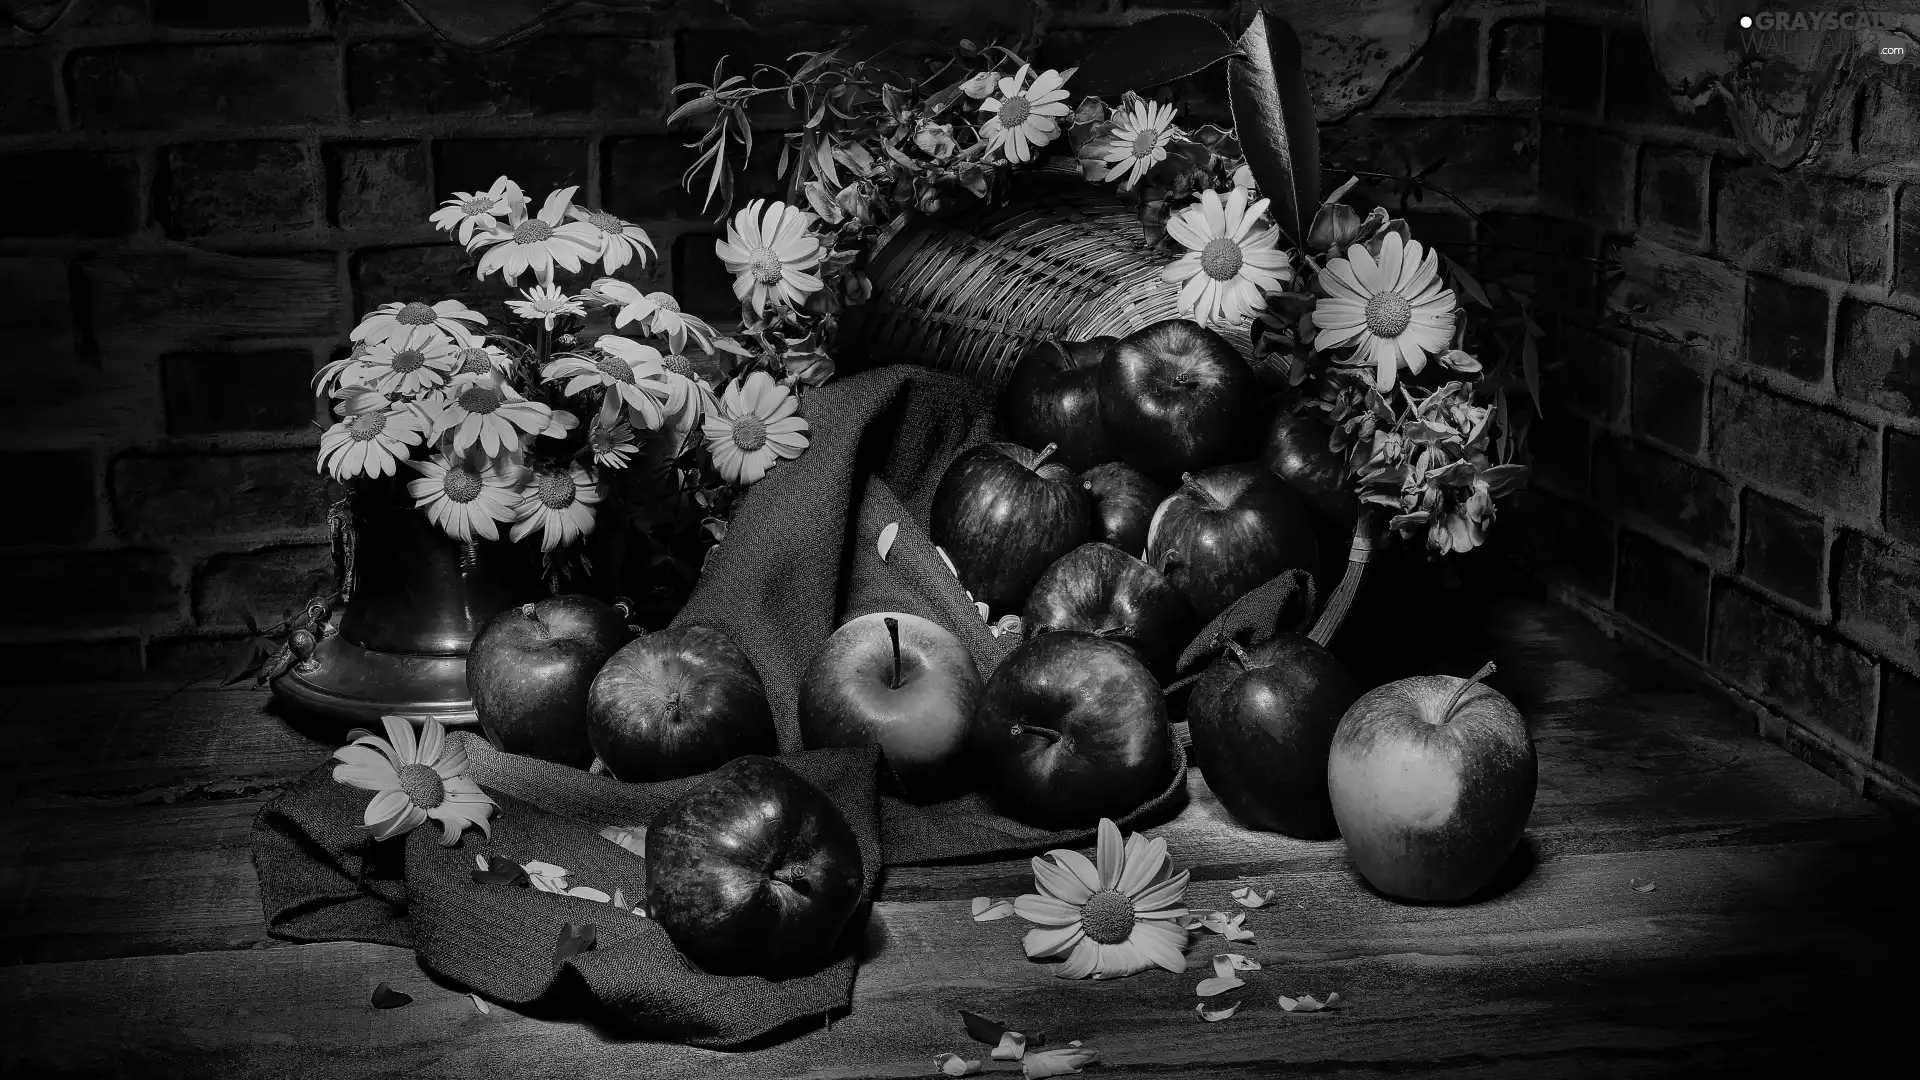 apples, Fruits, daisy, composition, Flowers, basket